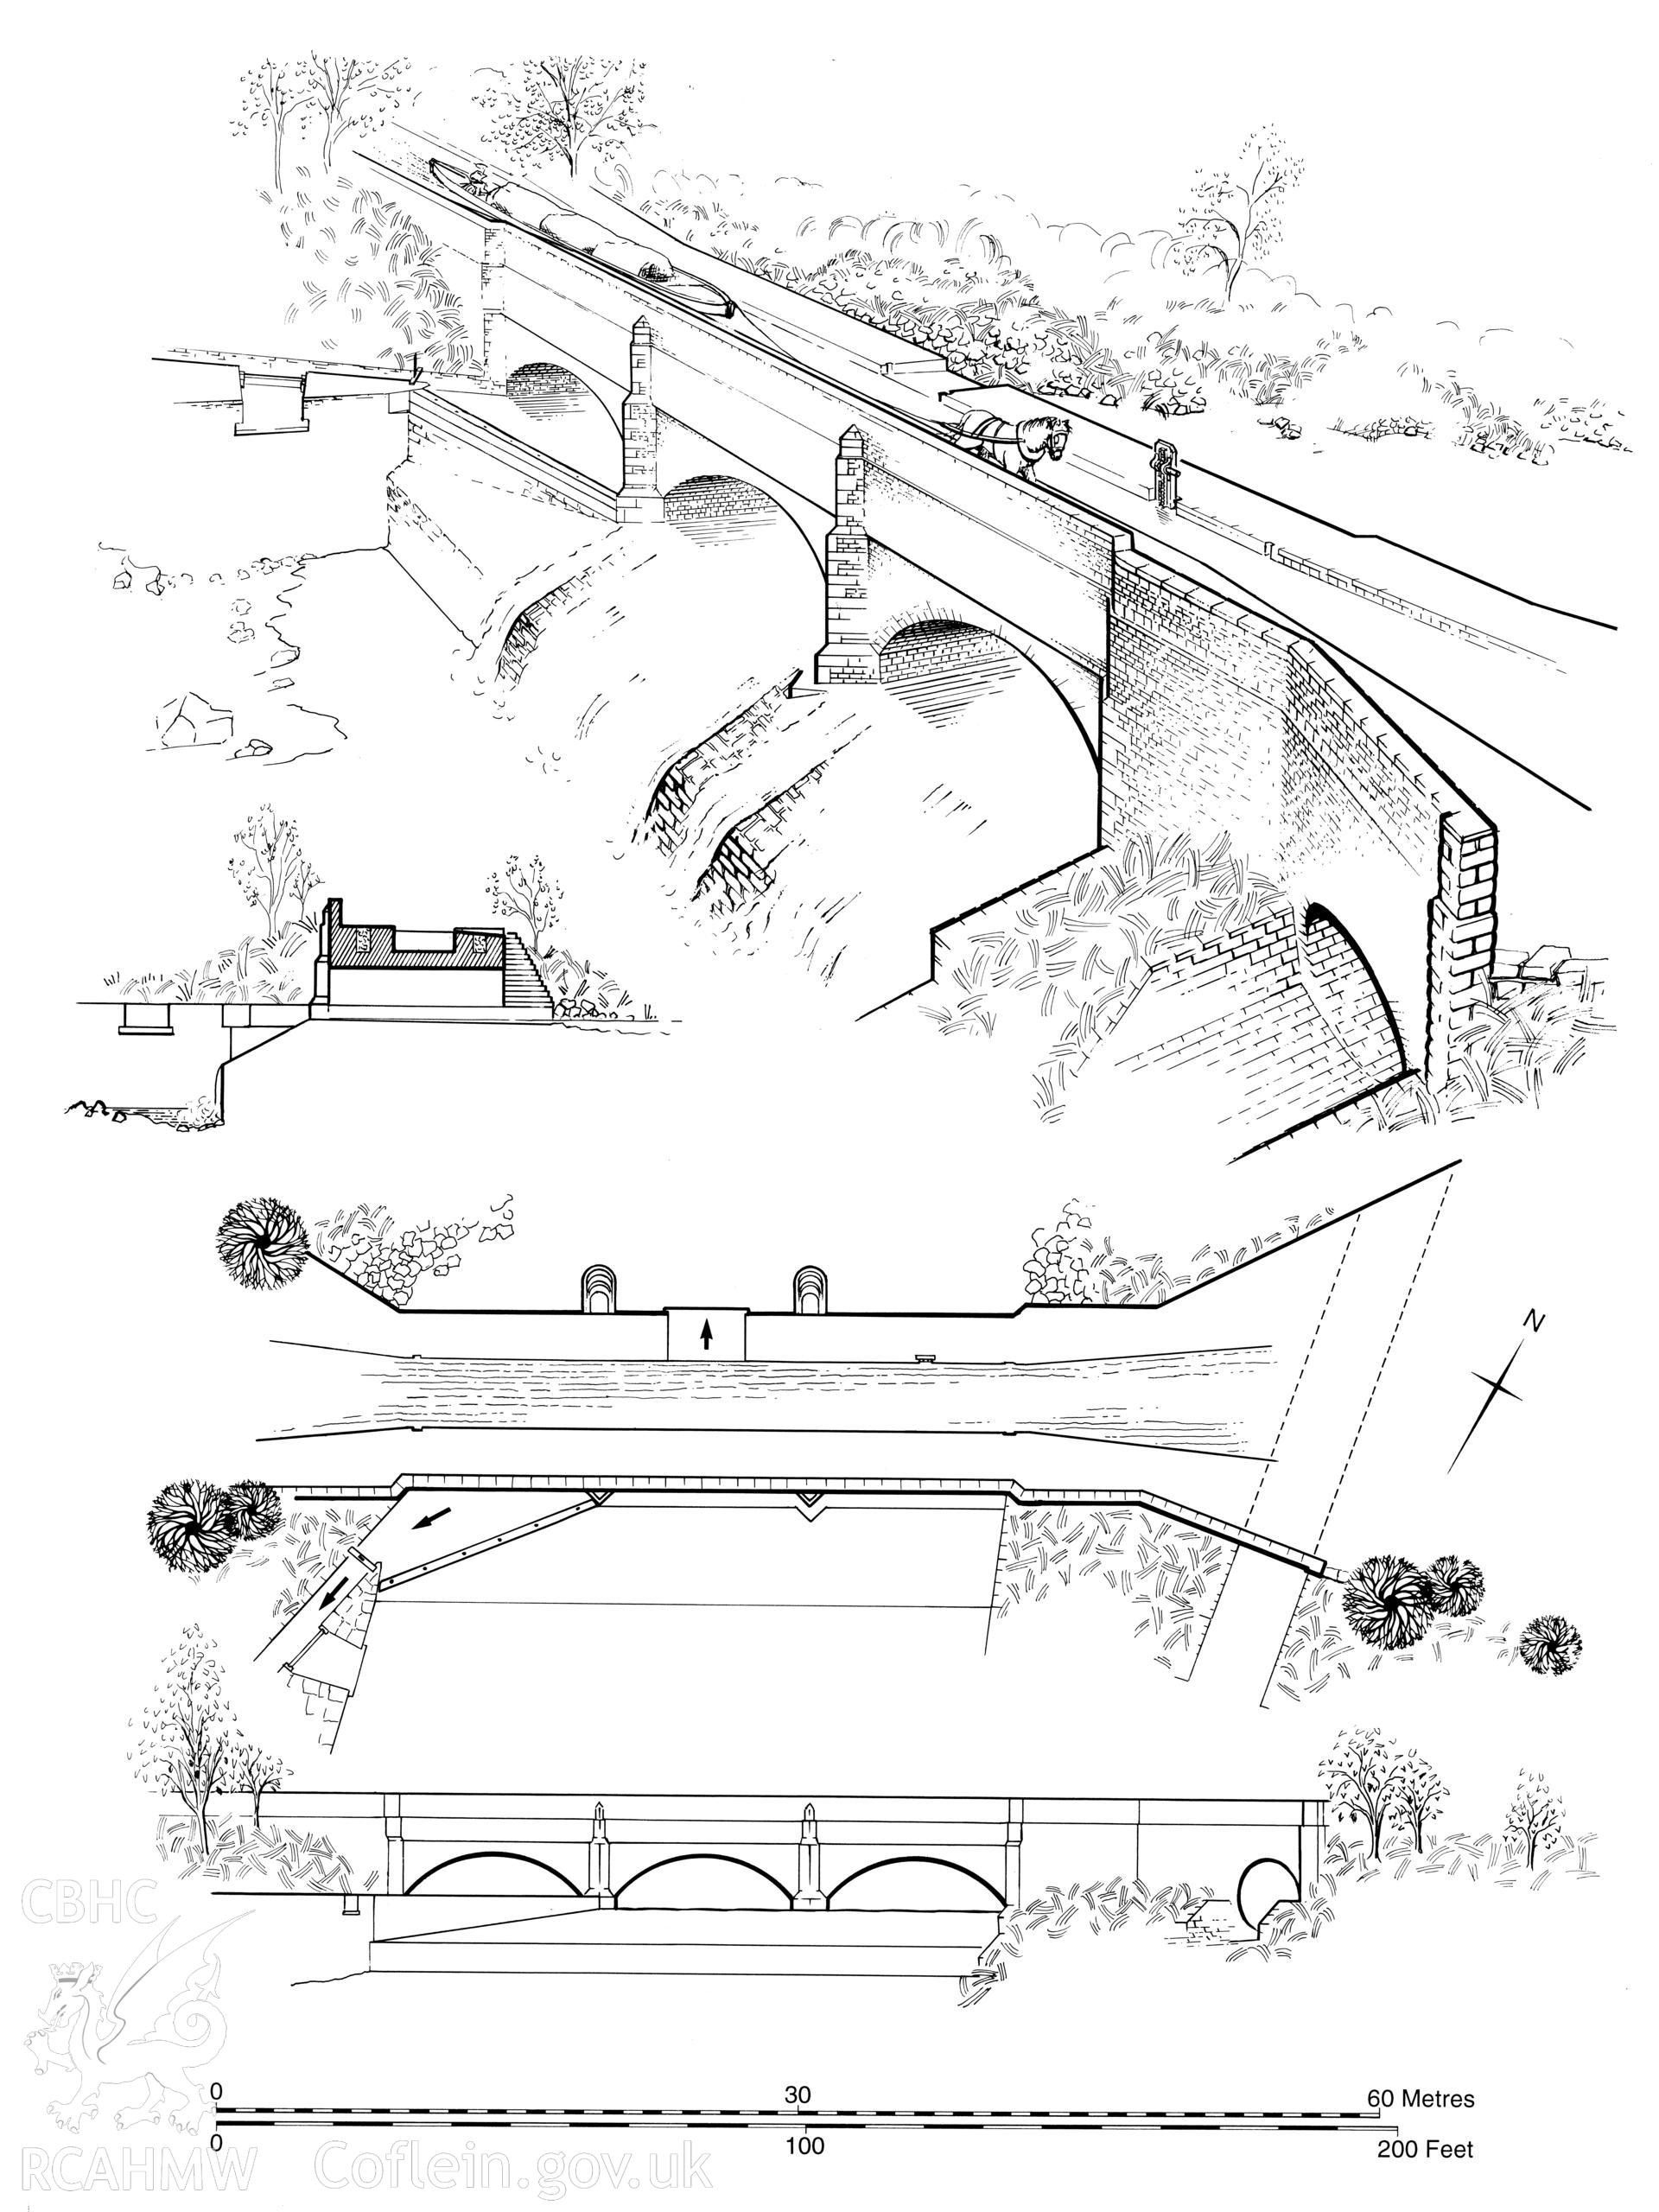 Afon Twrch Aqueduct; measured plan, section and perspective view produced by G.A. Ward, 1976